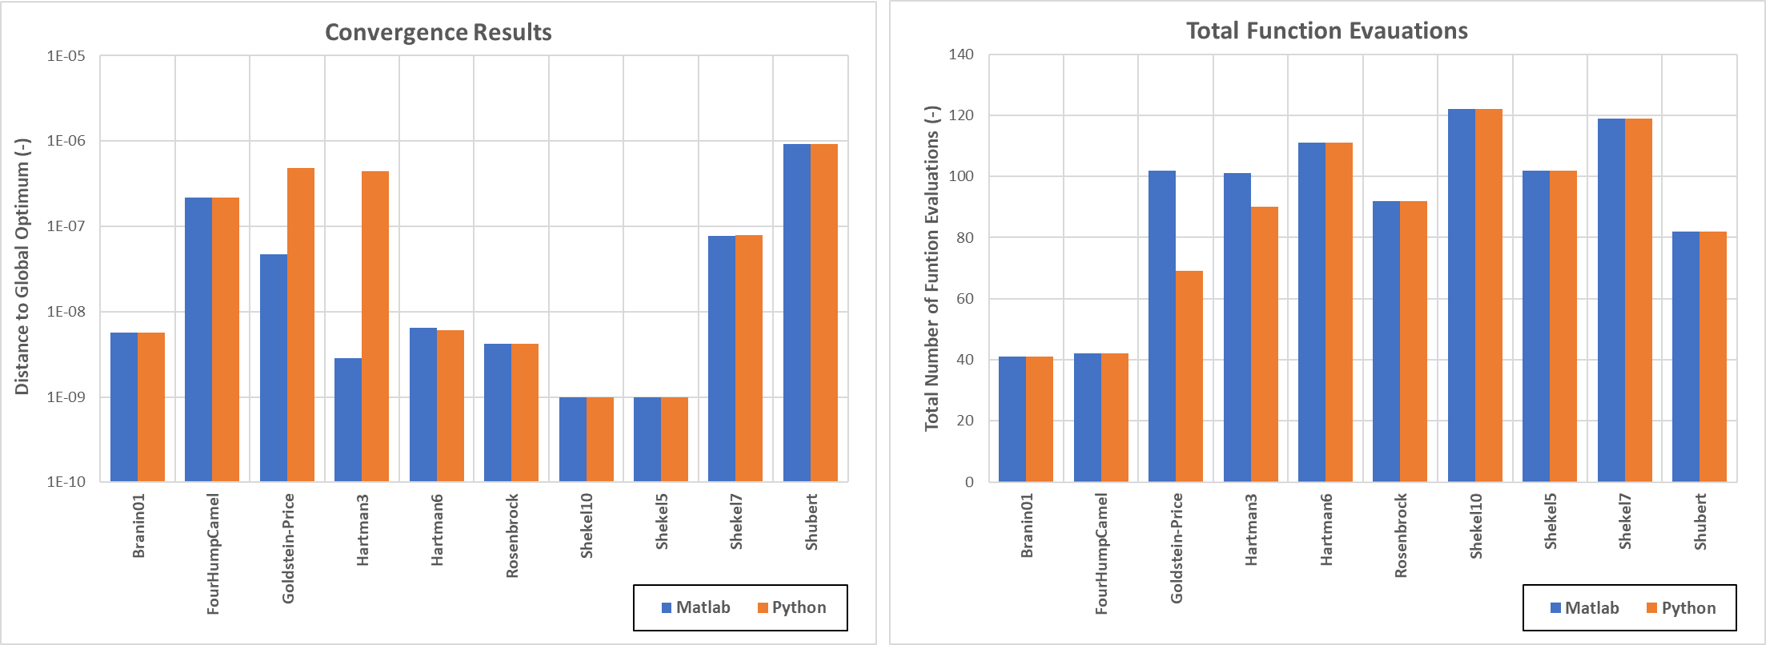 Comparison between Matlab and Python